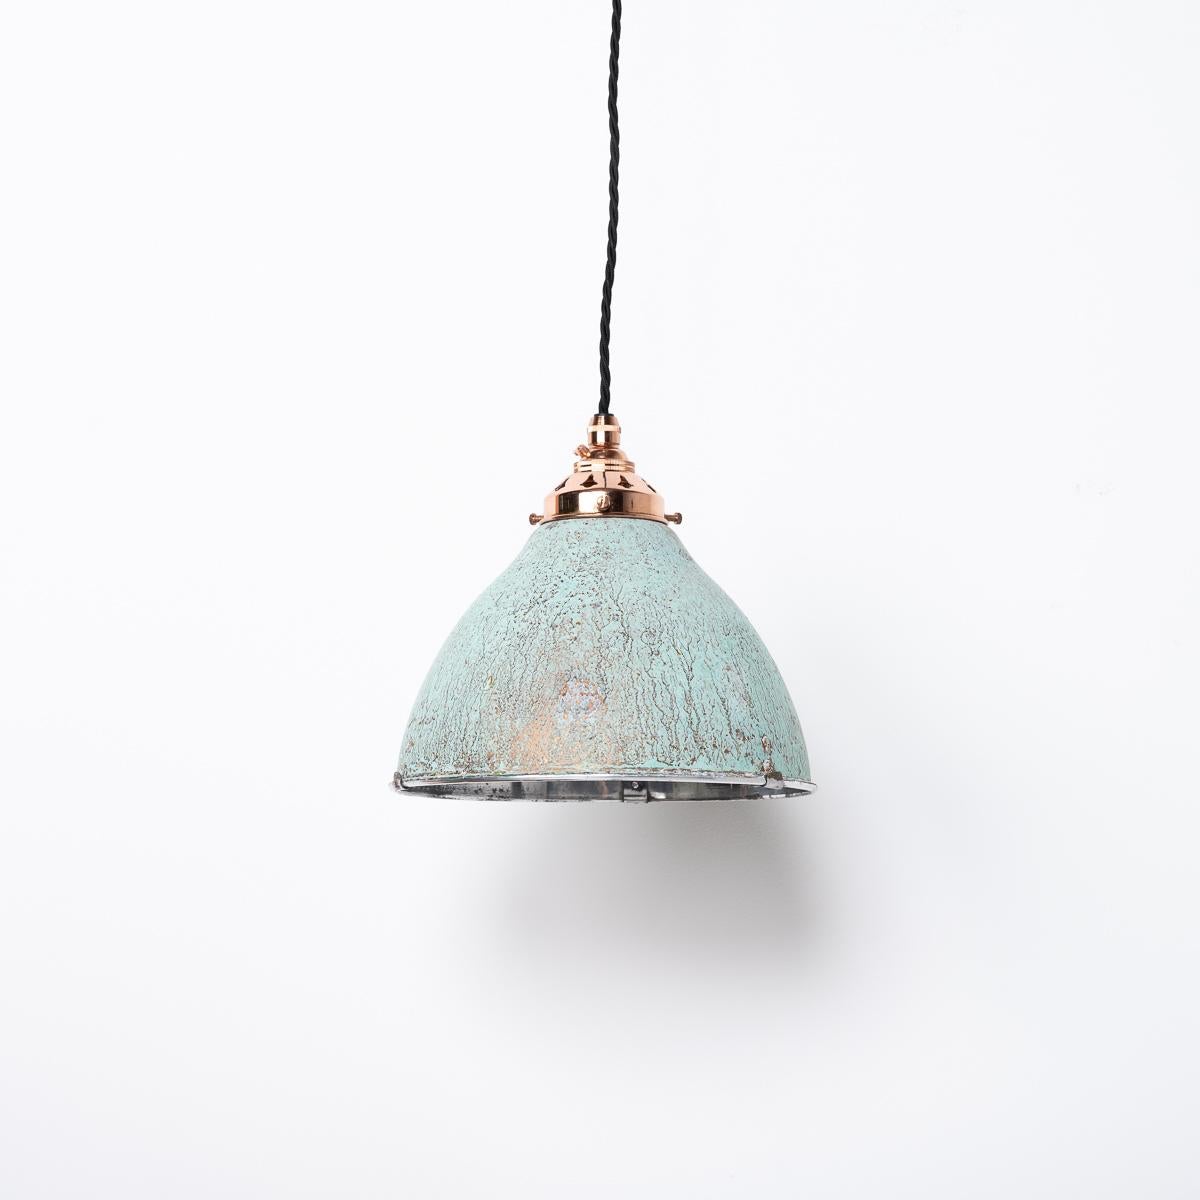 ORIGINAL HOLOPHANE SPUN ALUMINIUM PENDANT LIGHTS
A fab run of vintage Holophane spun aluminium shades with polished copper fittings.

Theses original Holophane shades have been painted on the exterior with a special copper based paint and then aged